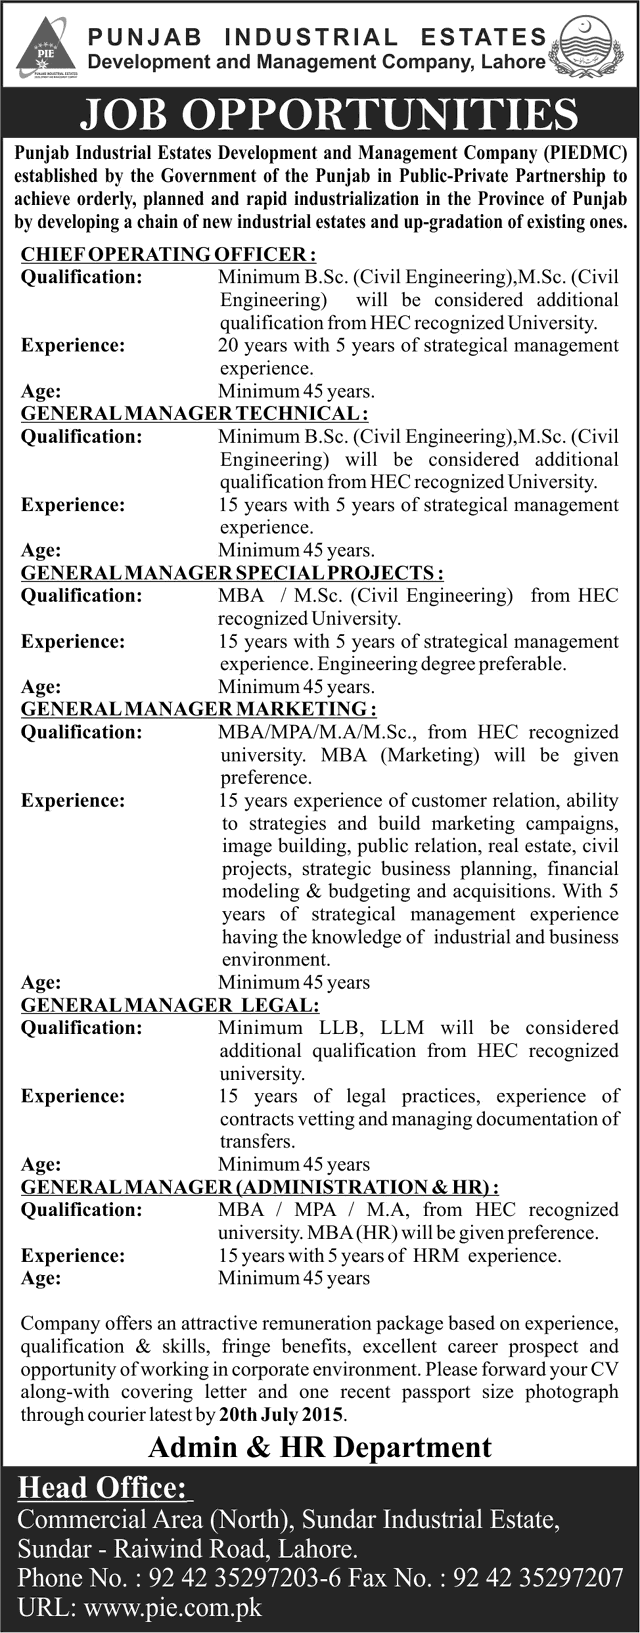 Jobs in Punjab Industrial Estates Development and Management Company Lahore 2015 July Latest